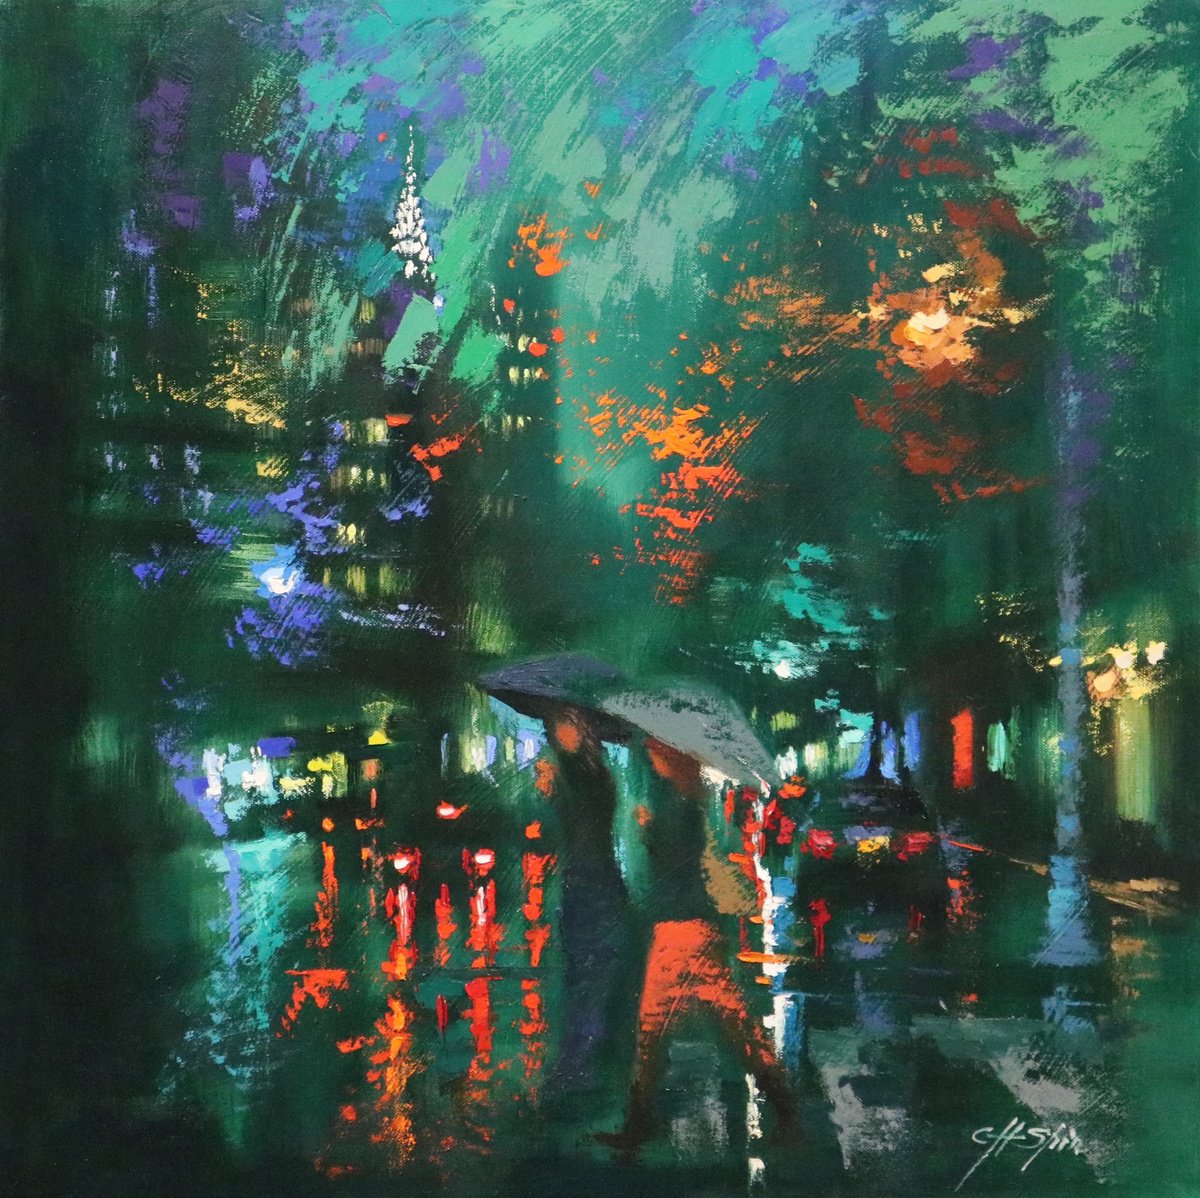 Rainy Day Walkers in Madison Avenue by Chin H Shin